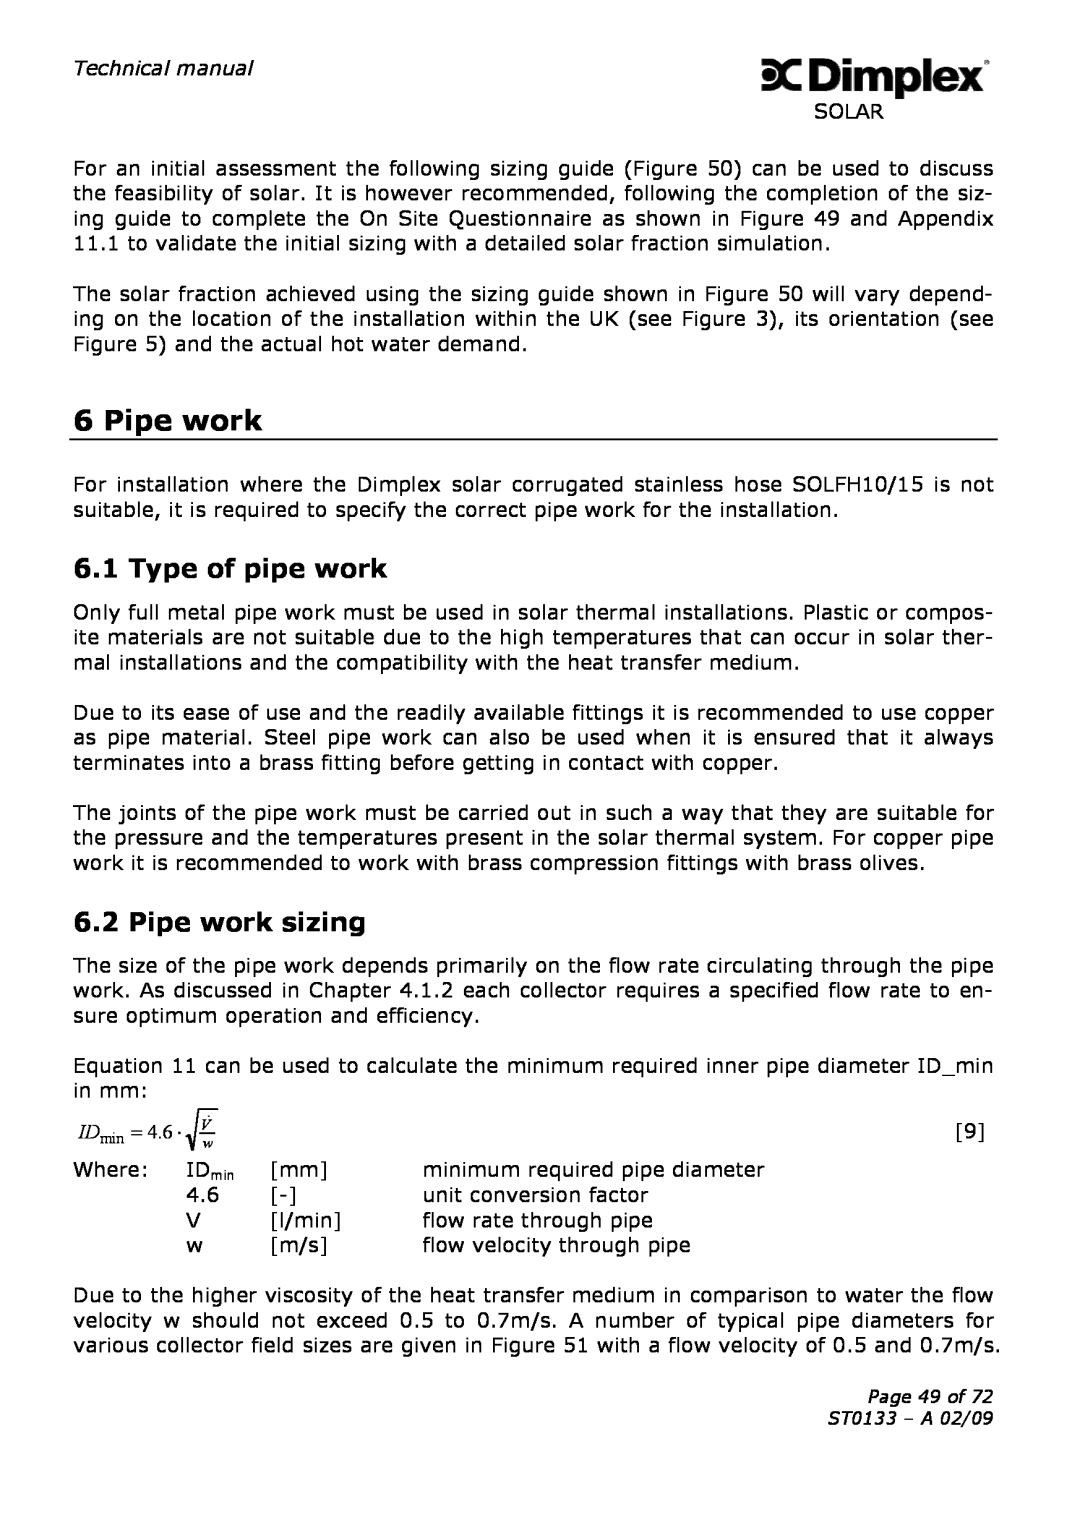 Dimplex ST0133 technical manual Type of pipe work, Pipe work sizing 